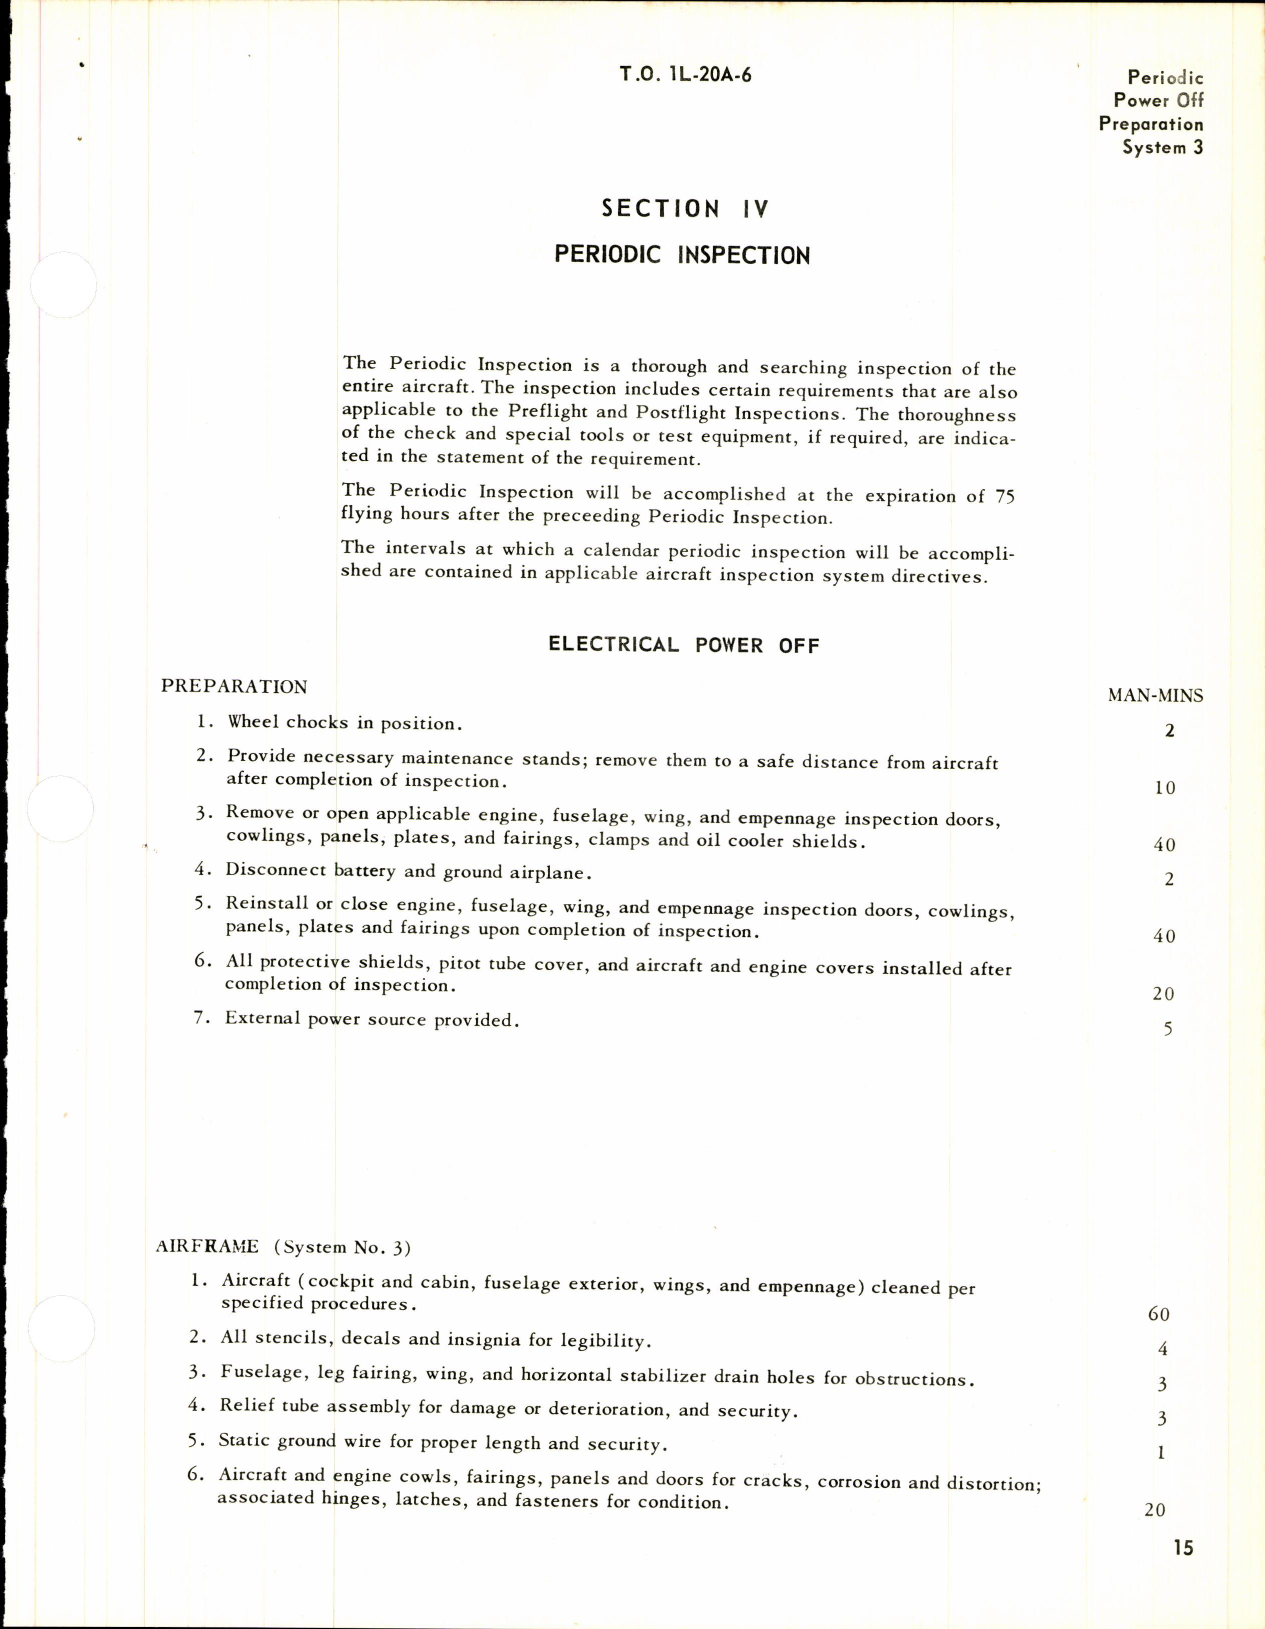 Sample page 5 from AirCorps Library document: Inspection Requirements for L-20A